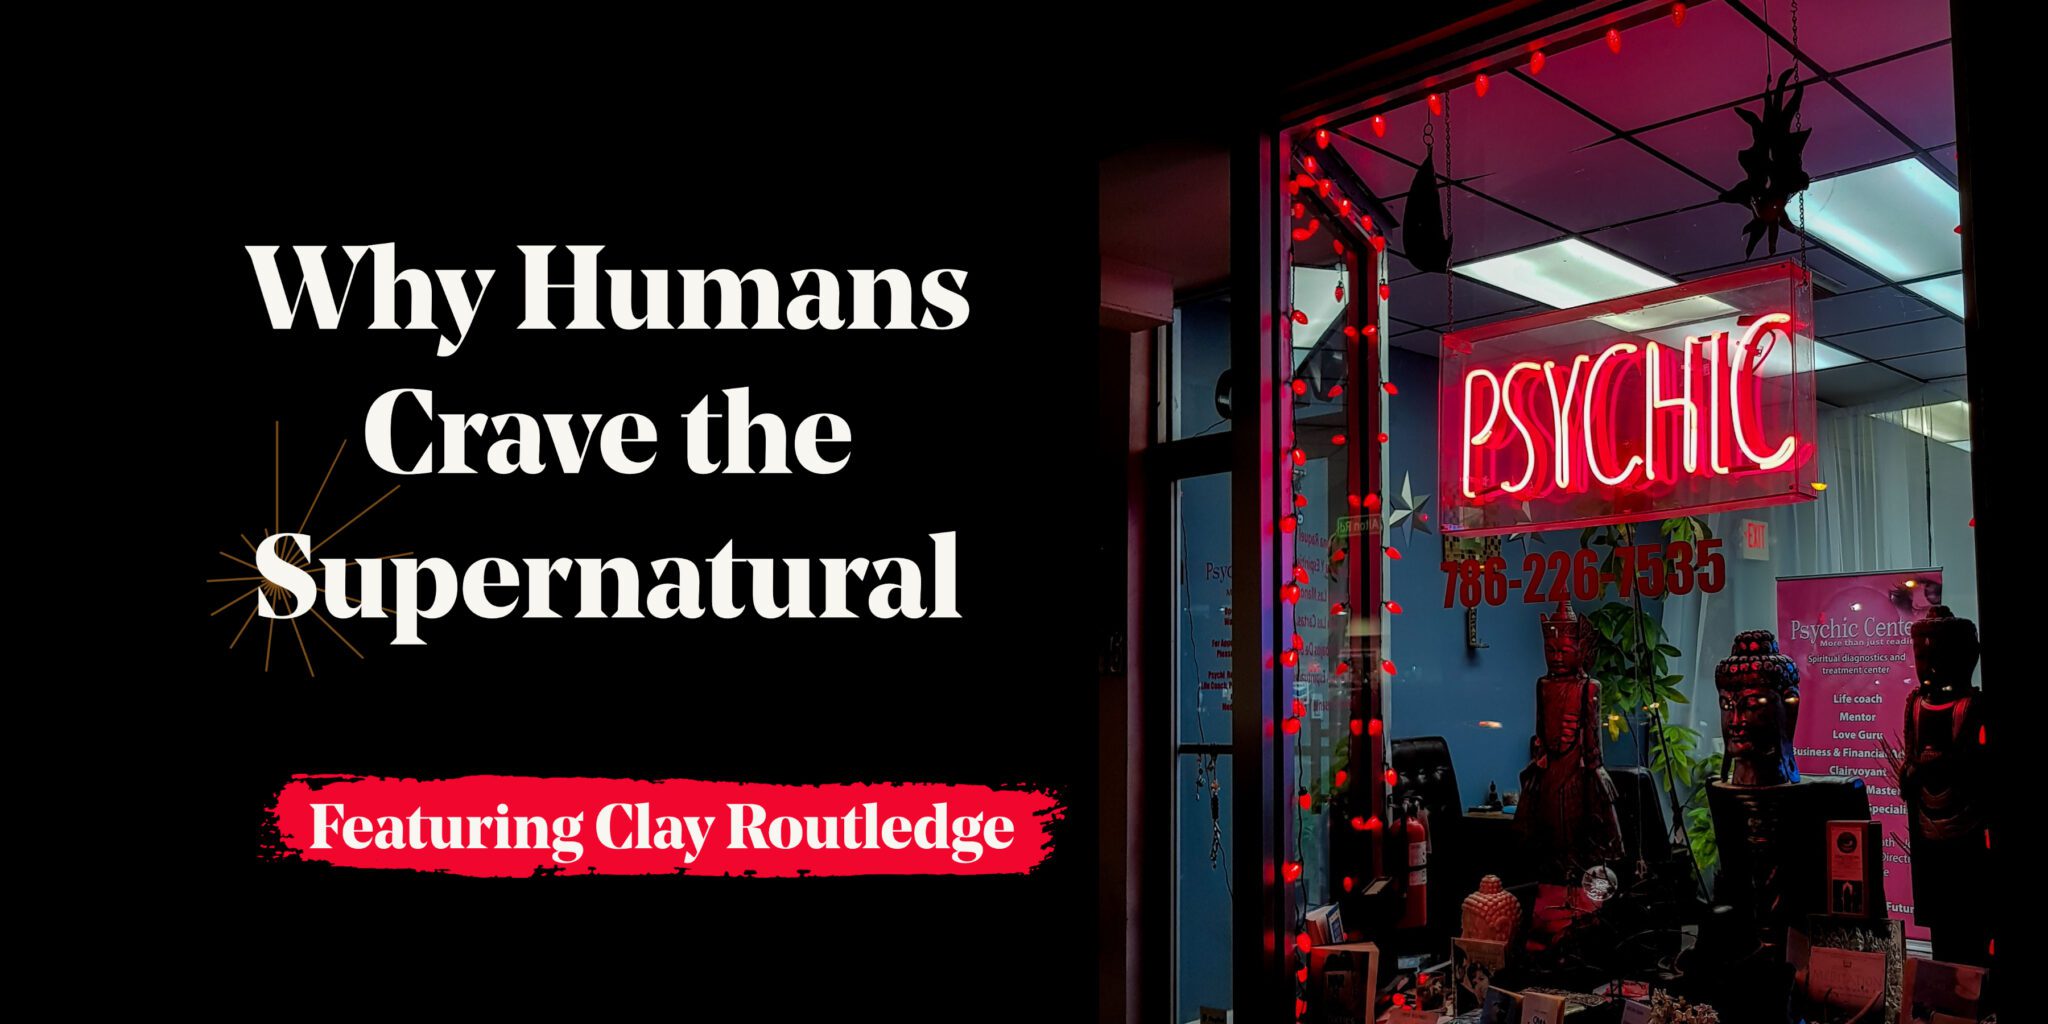 Why Humans Crave the Supernatural